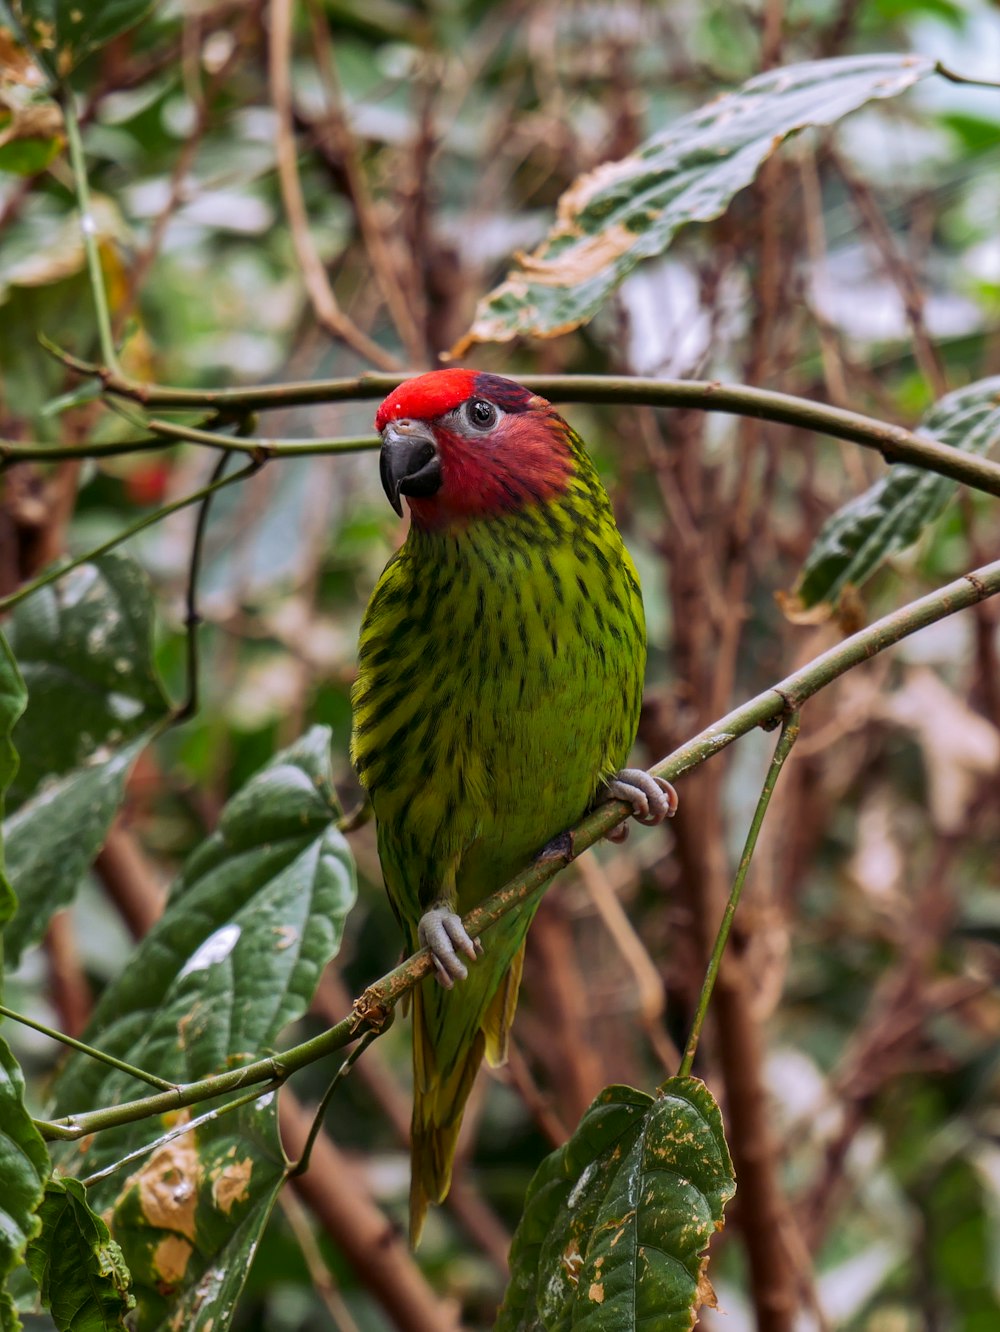 a green and red bird sitting on top of a tree branch